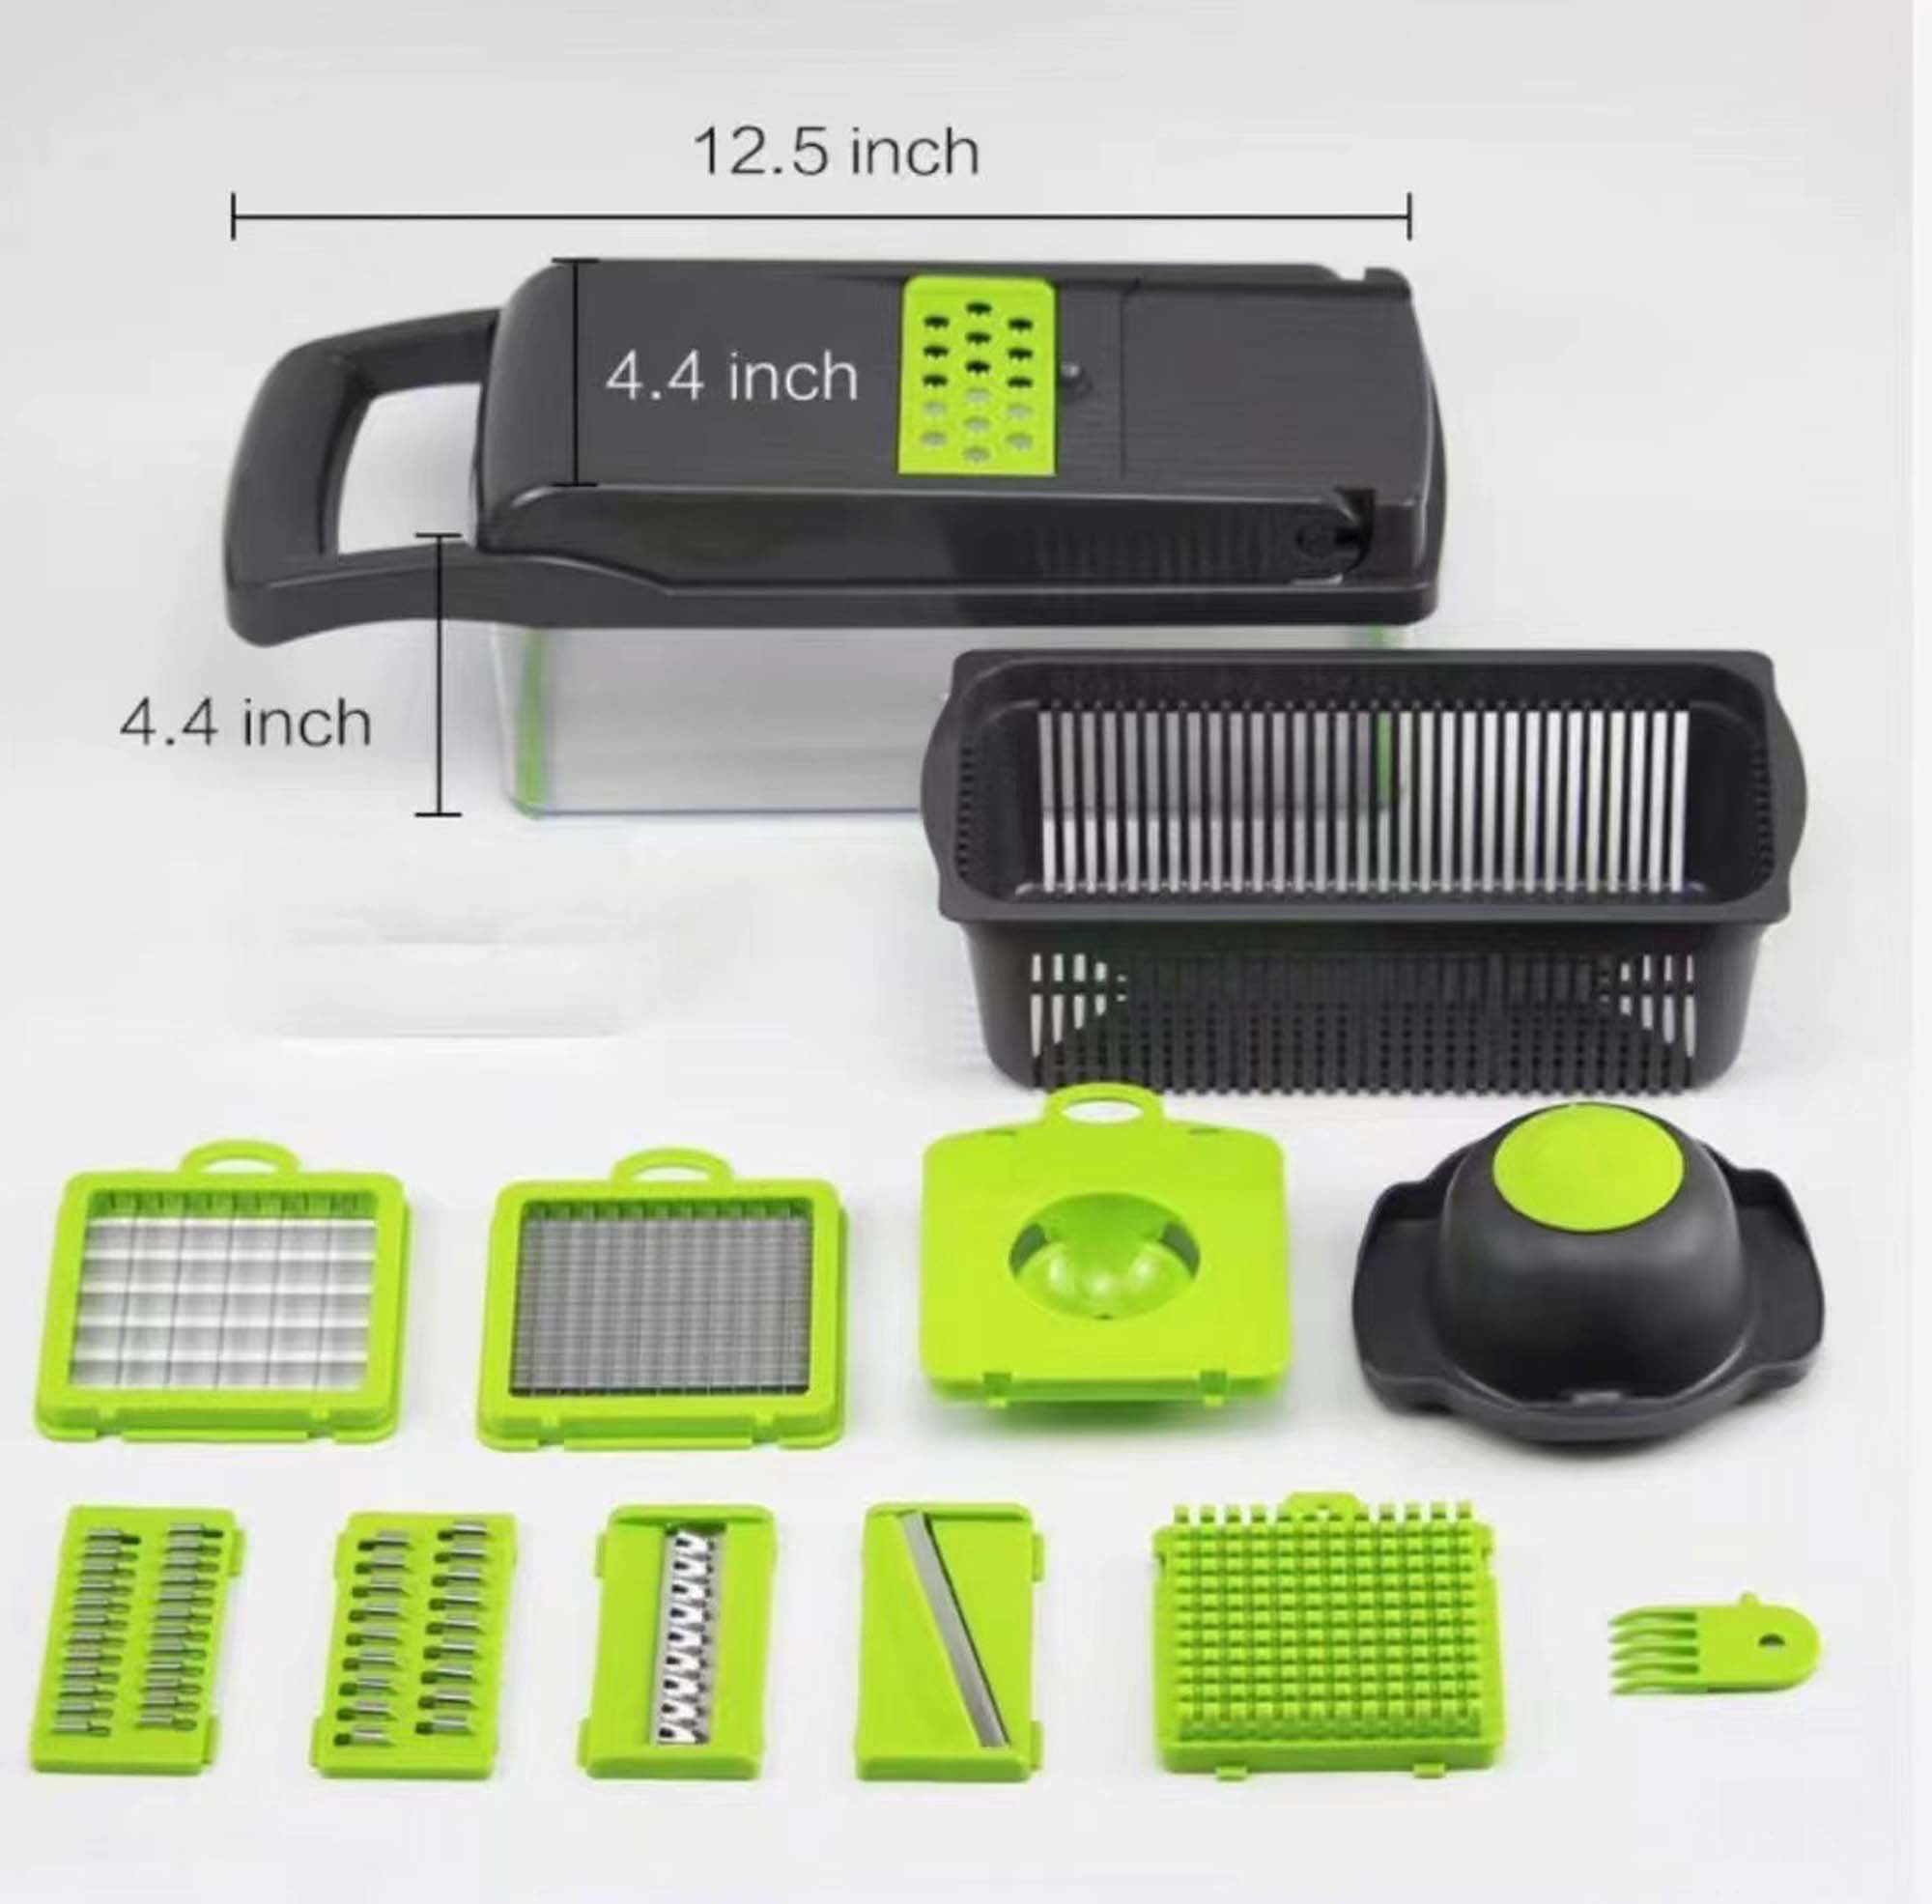 10 in 1 Vegetable Chopper – Exclusive Gets